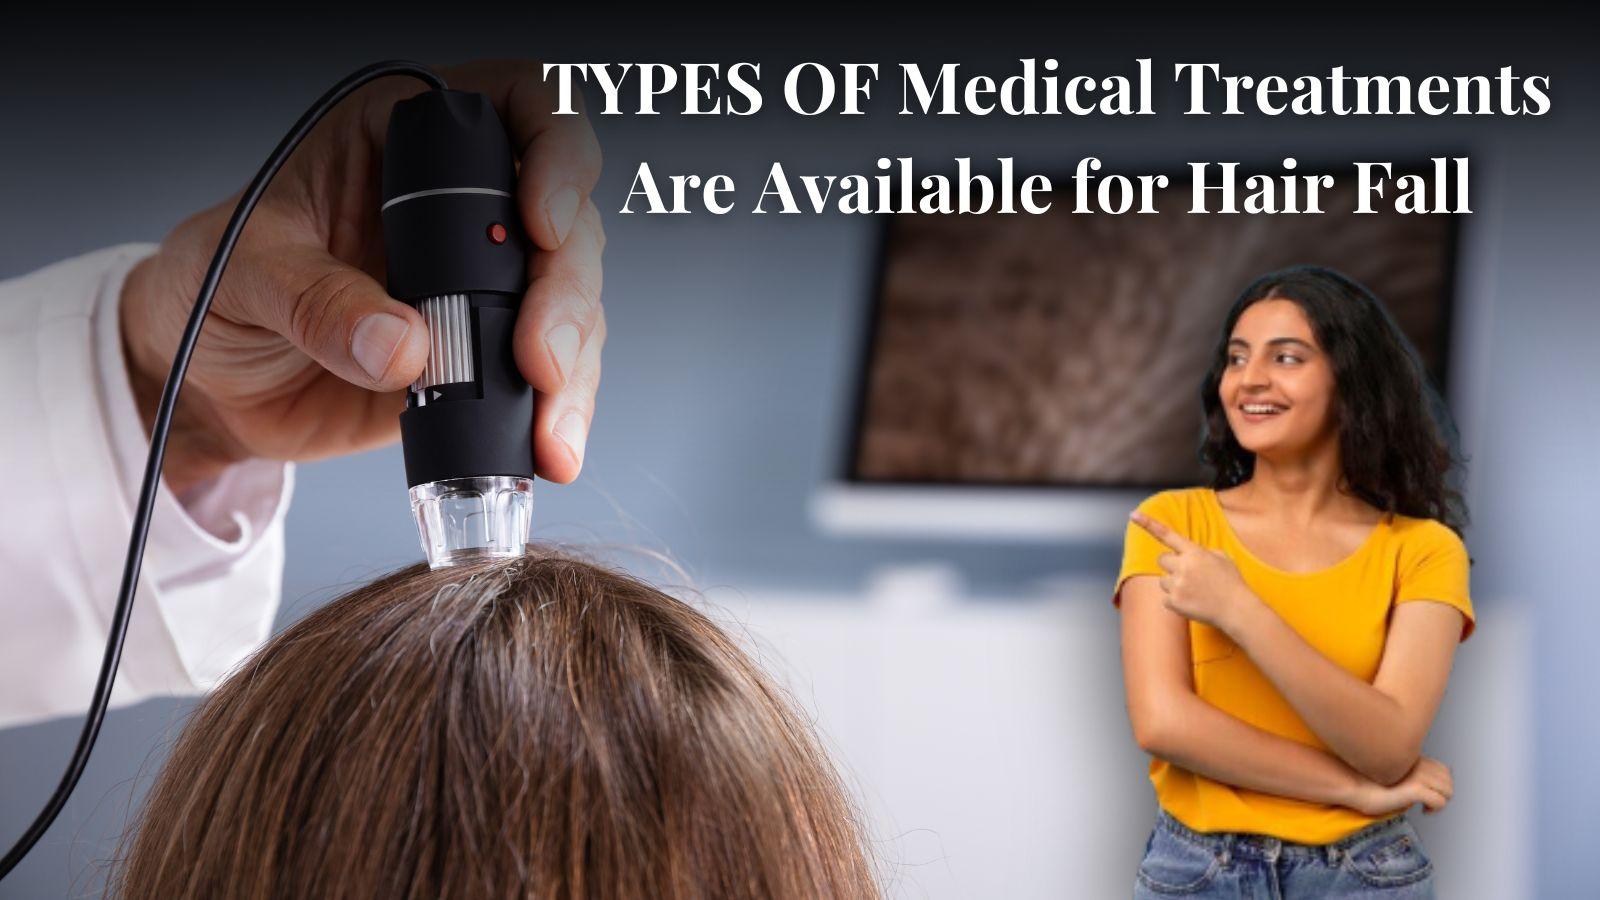 What Kinds Of Medical Treatments Are Available for Hair Fall?